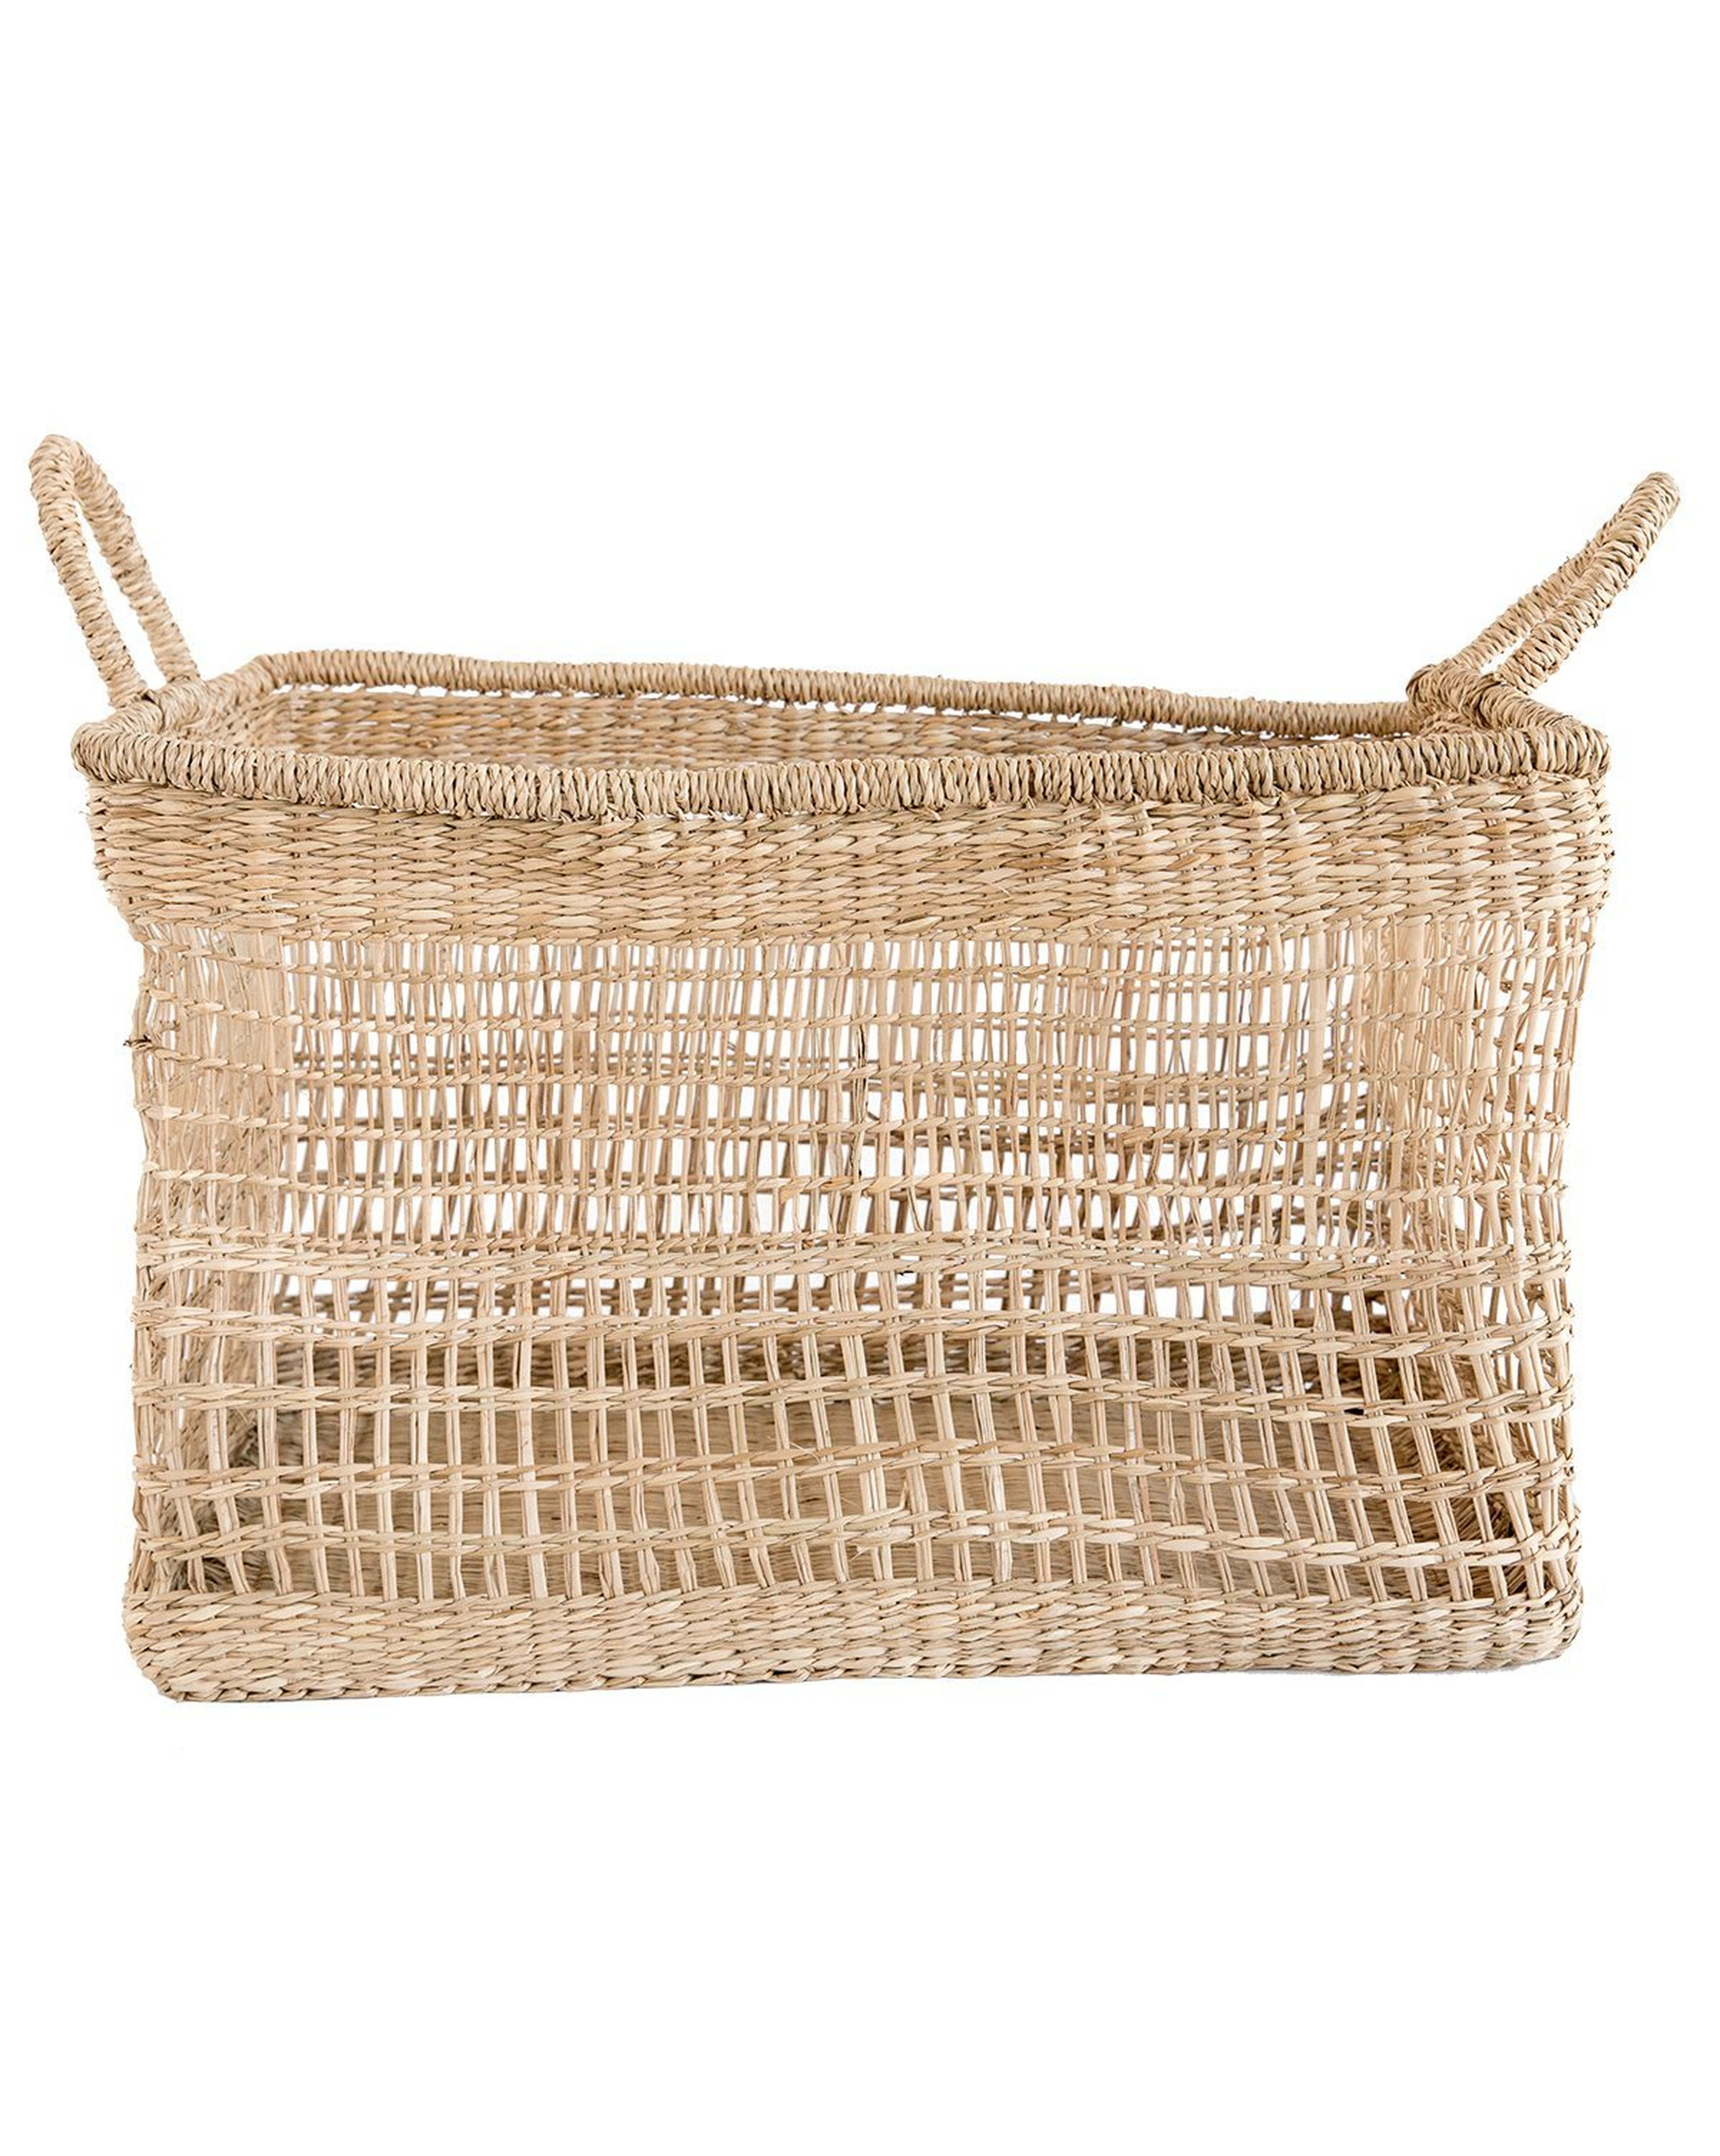 RECTANGLE WOVEN BASKETS- Large - McGee & Co.